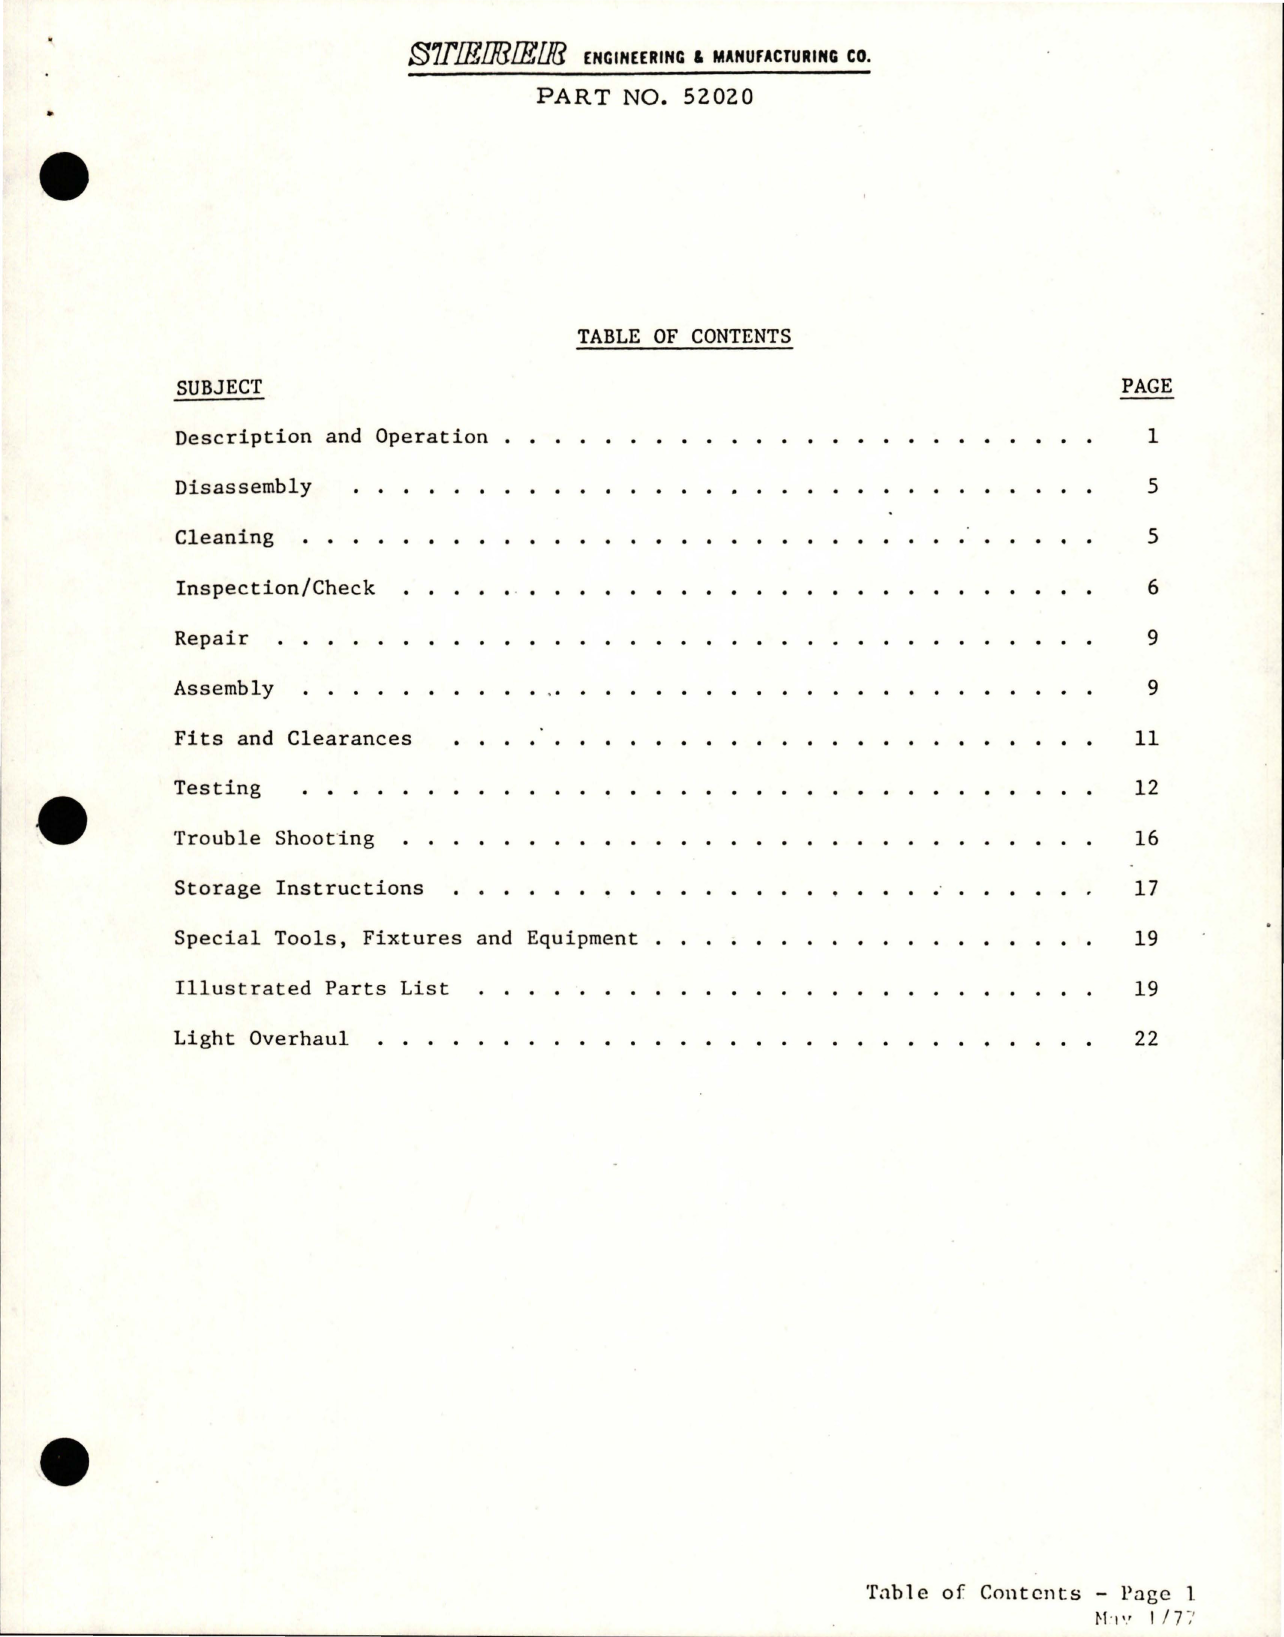 Sample page 5 from AirCorps Library document: Overhaul Manual with Illustrated Parts List for Hydraulic Manifold Assembly - Part 52020, 52020-3